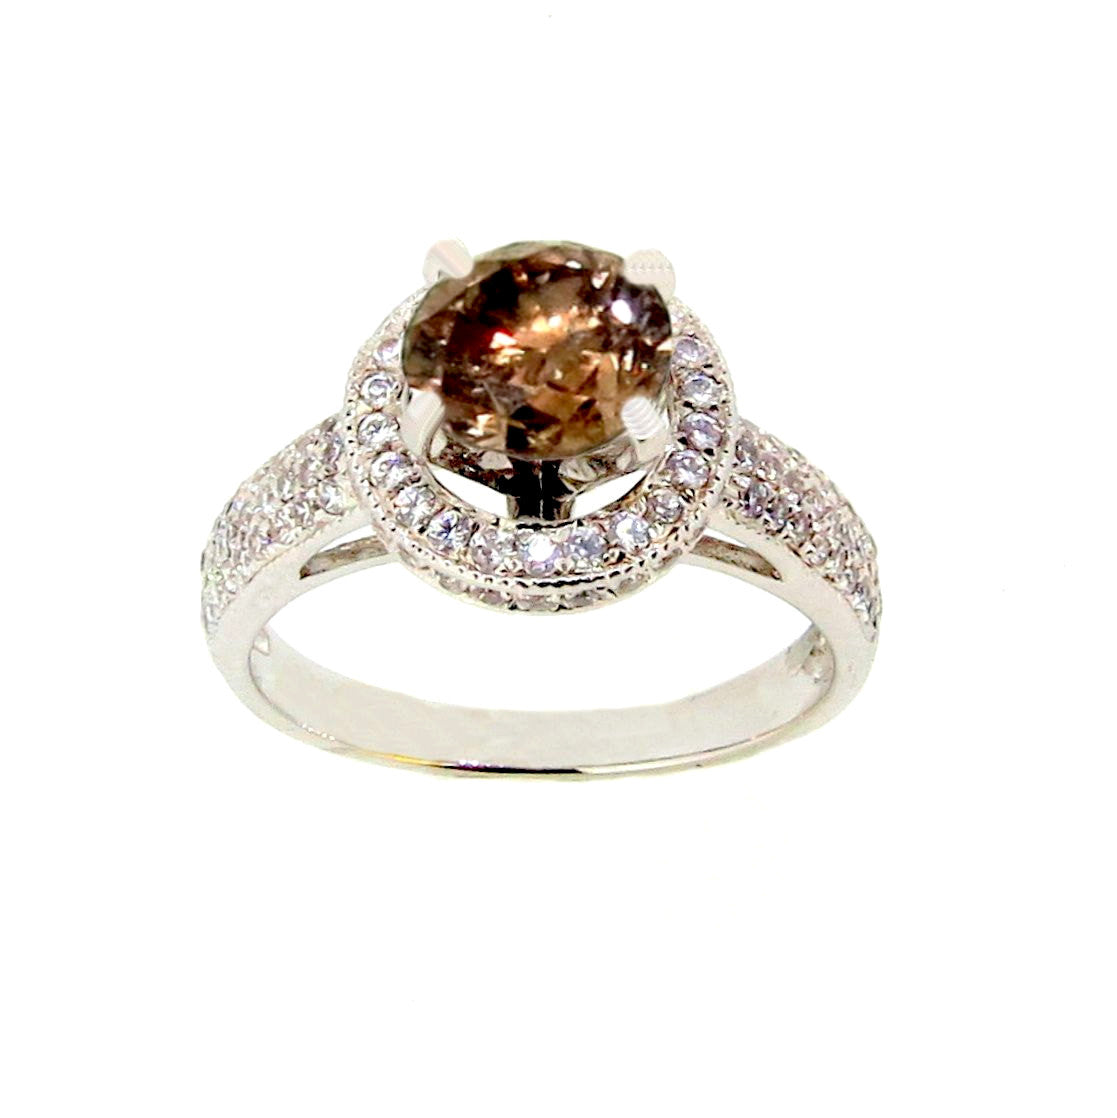 1 Carat Fancy Brown Diamond, Floating Halo, Engagement Ring, Anniversary Ring - BD85030